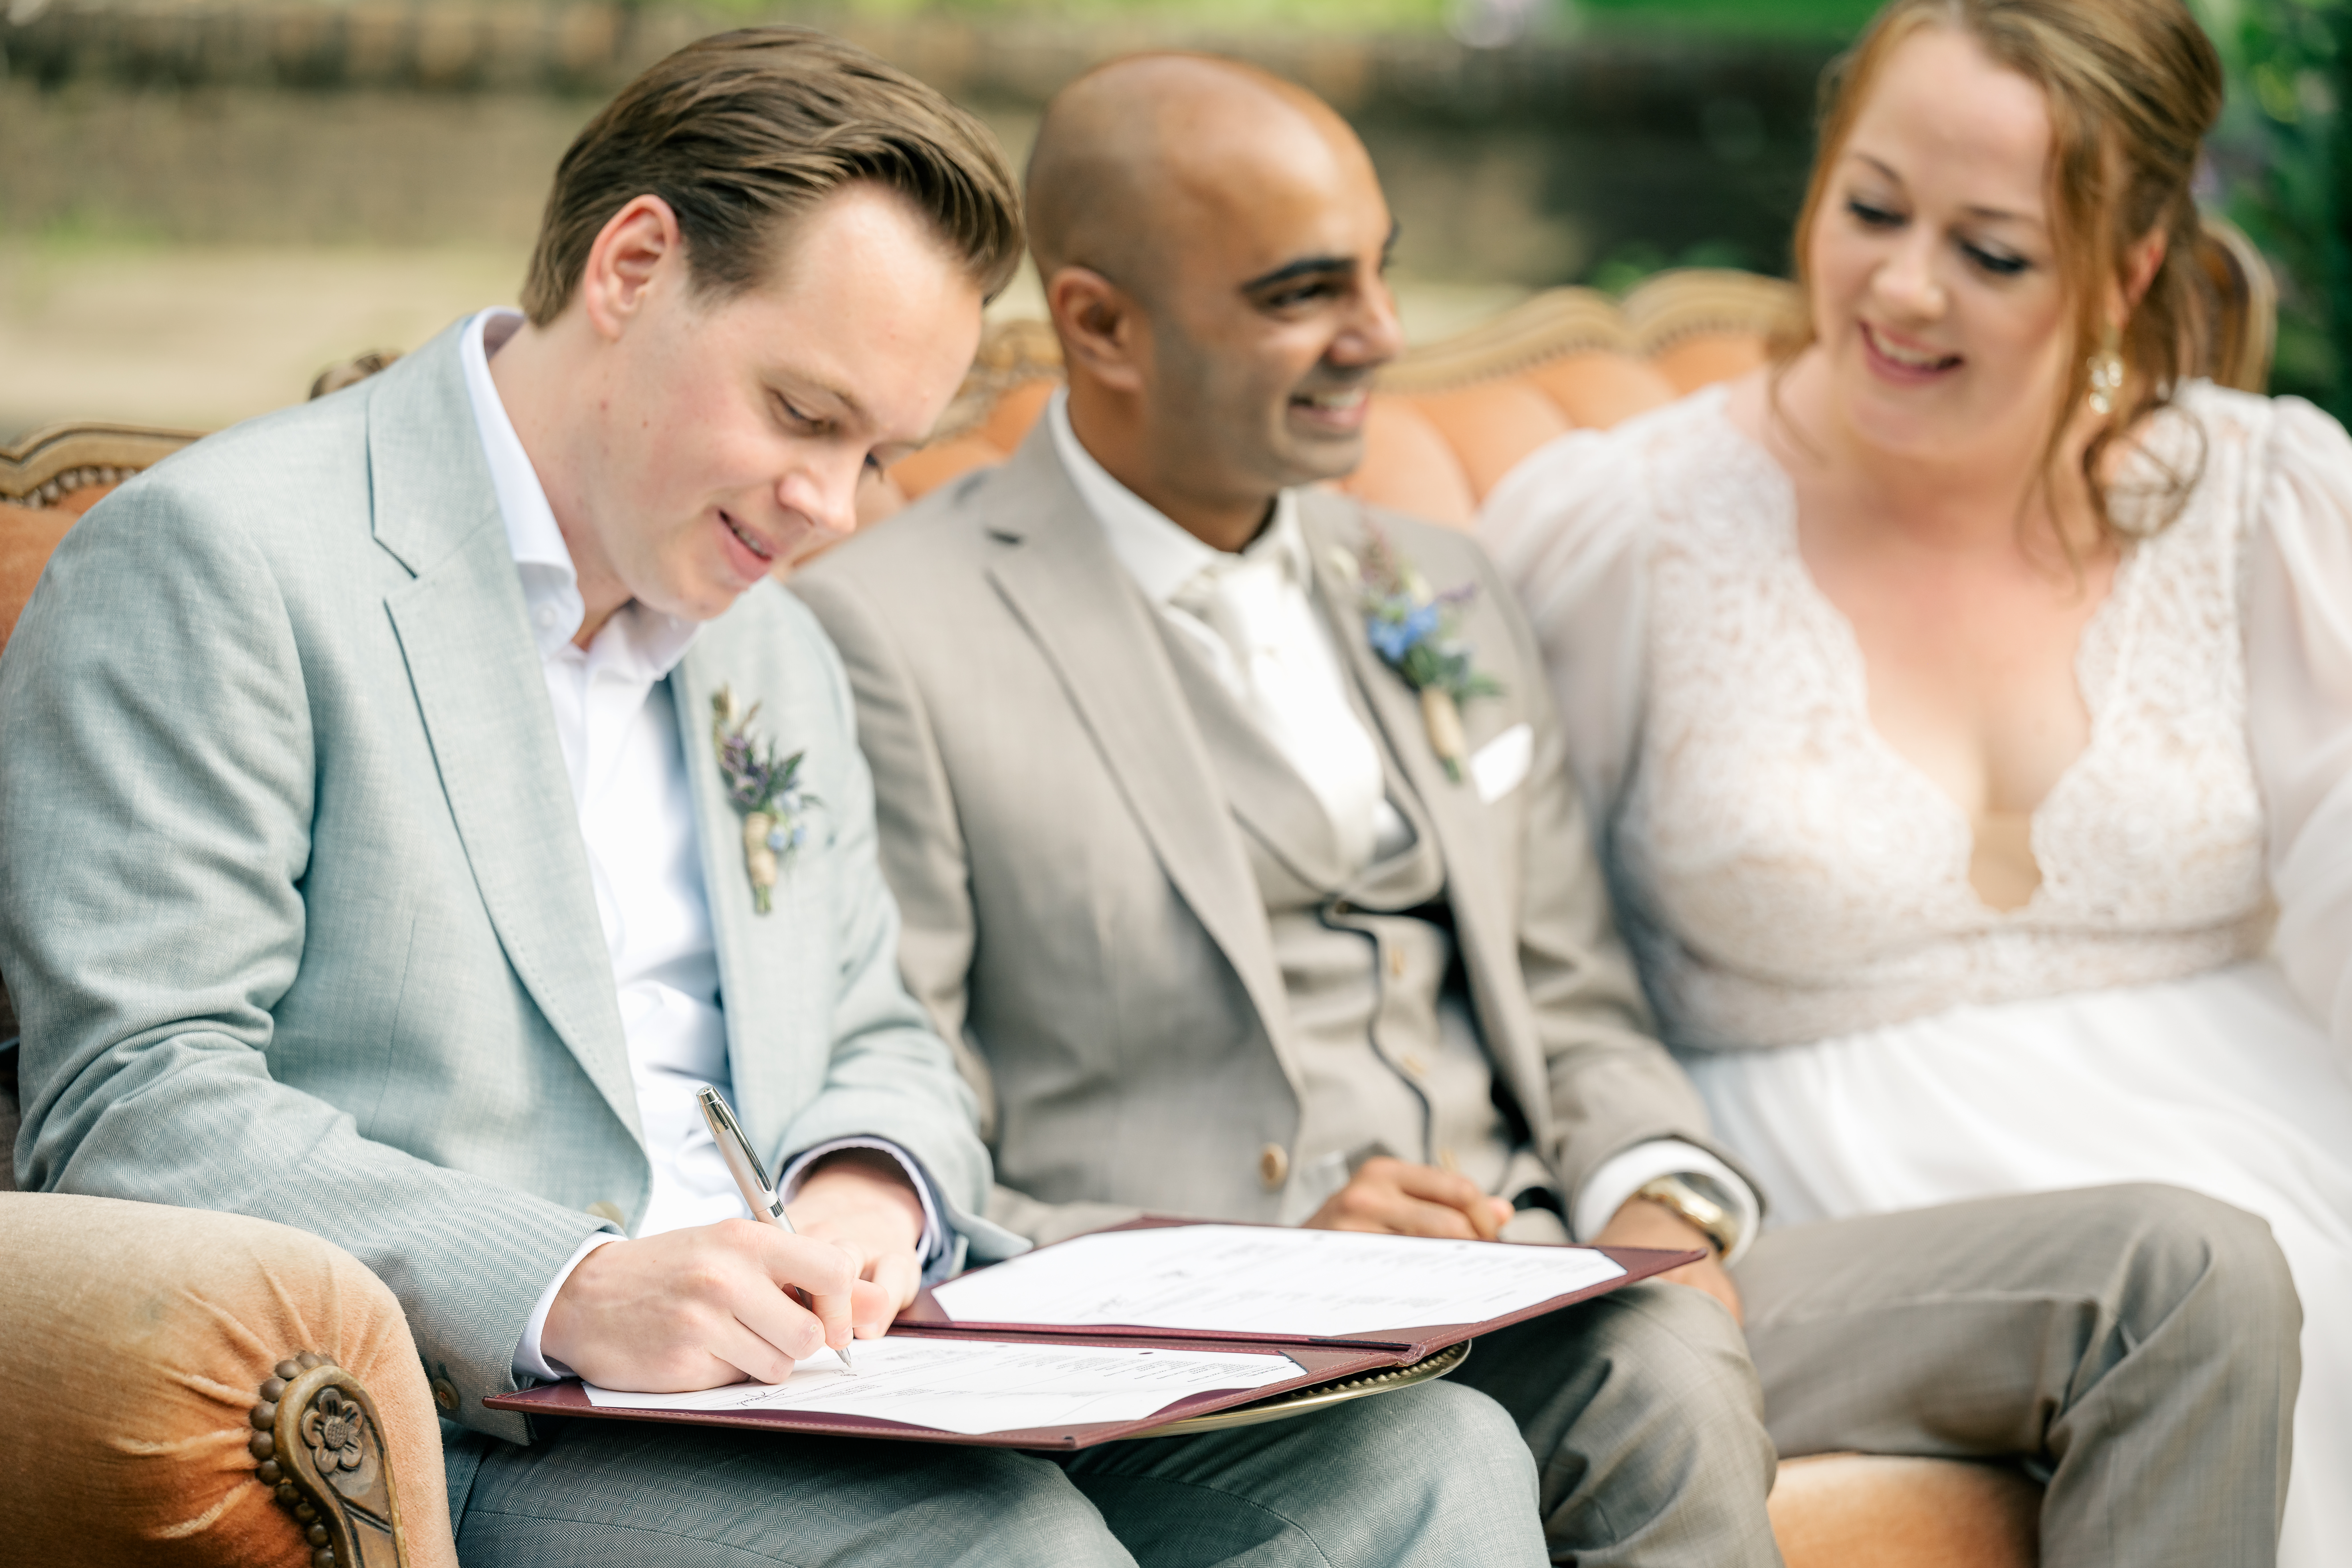 Three people are seated on a vintage ochre sofa outdoors. The man closest is a witness for the wedding and he signs the marriage record as the bride and groom look on